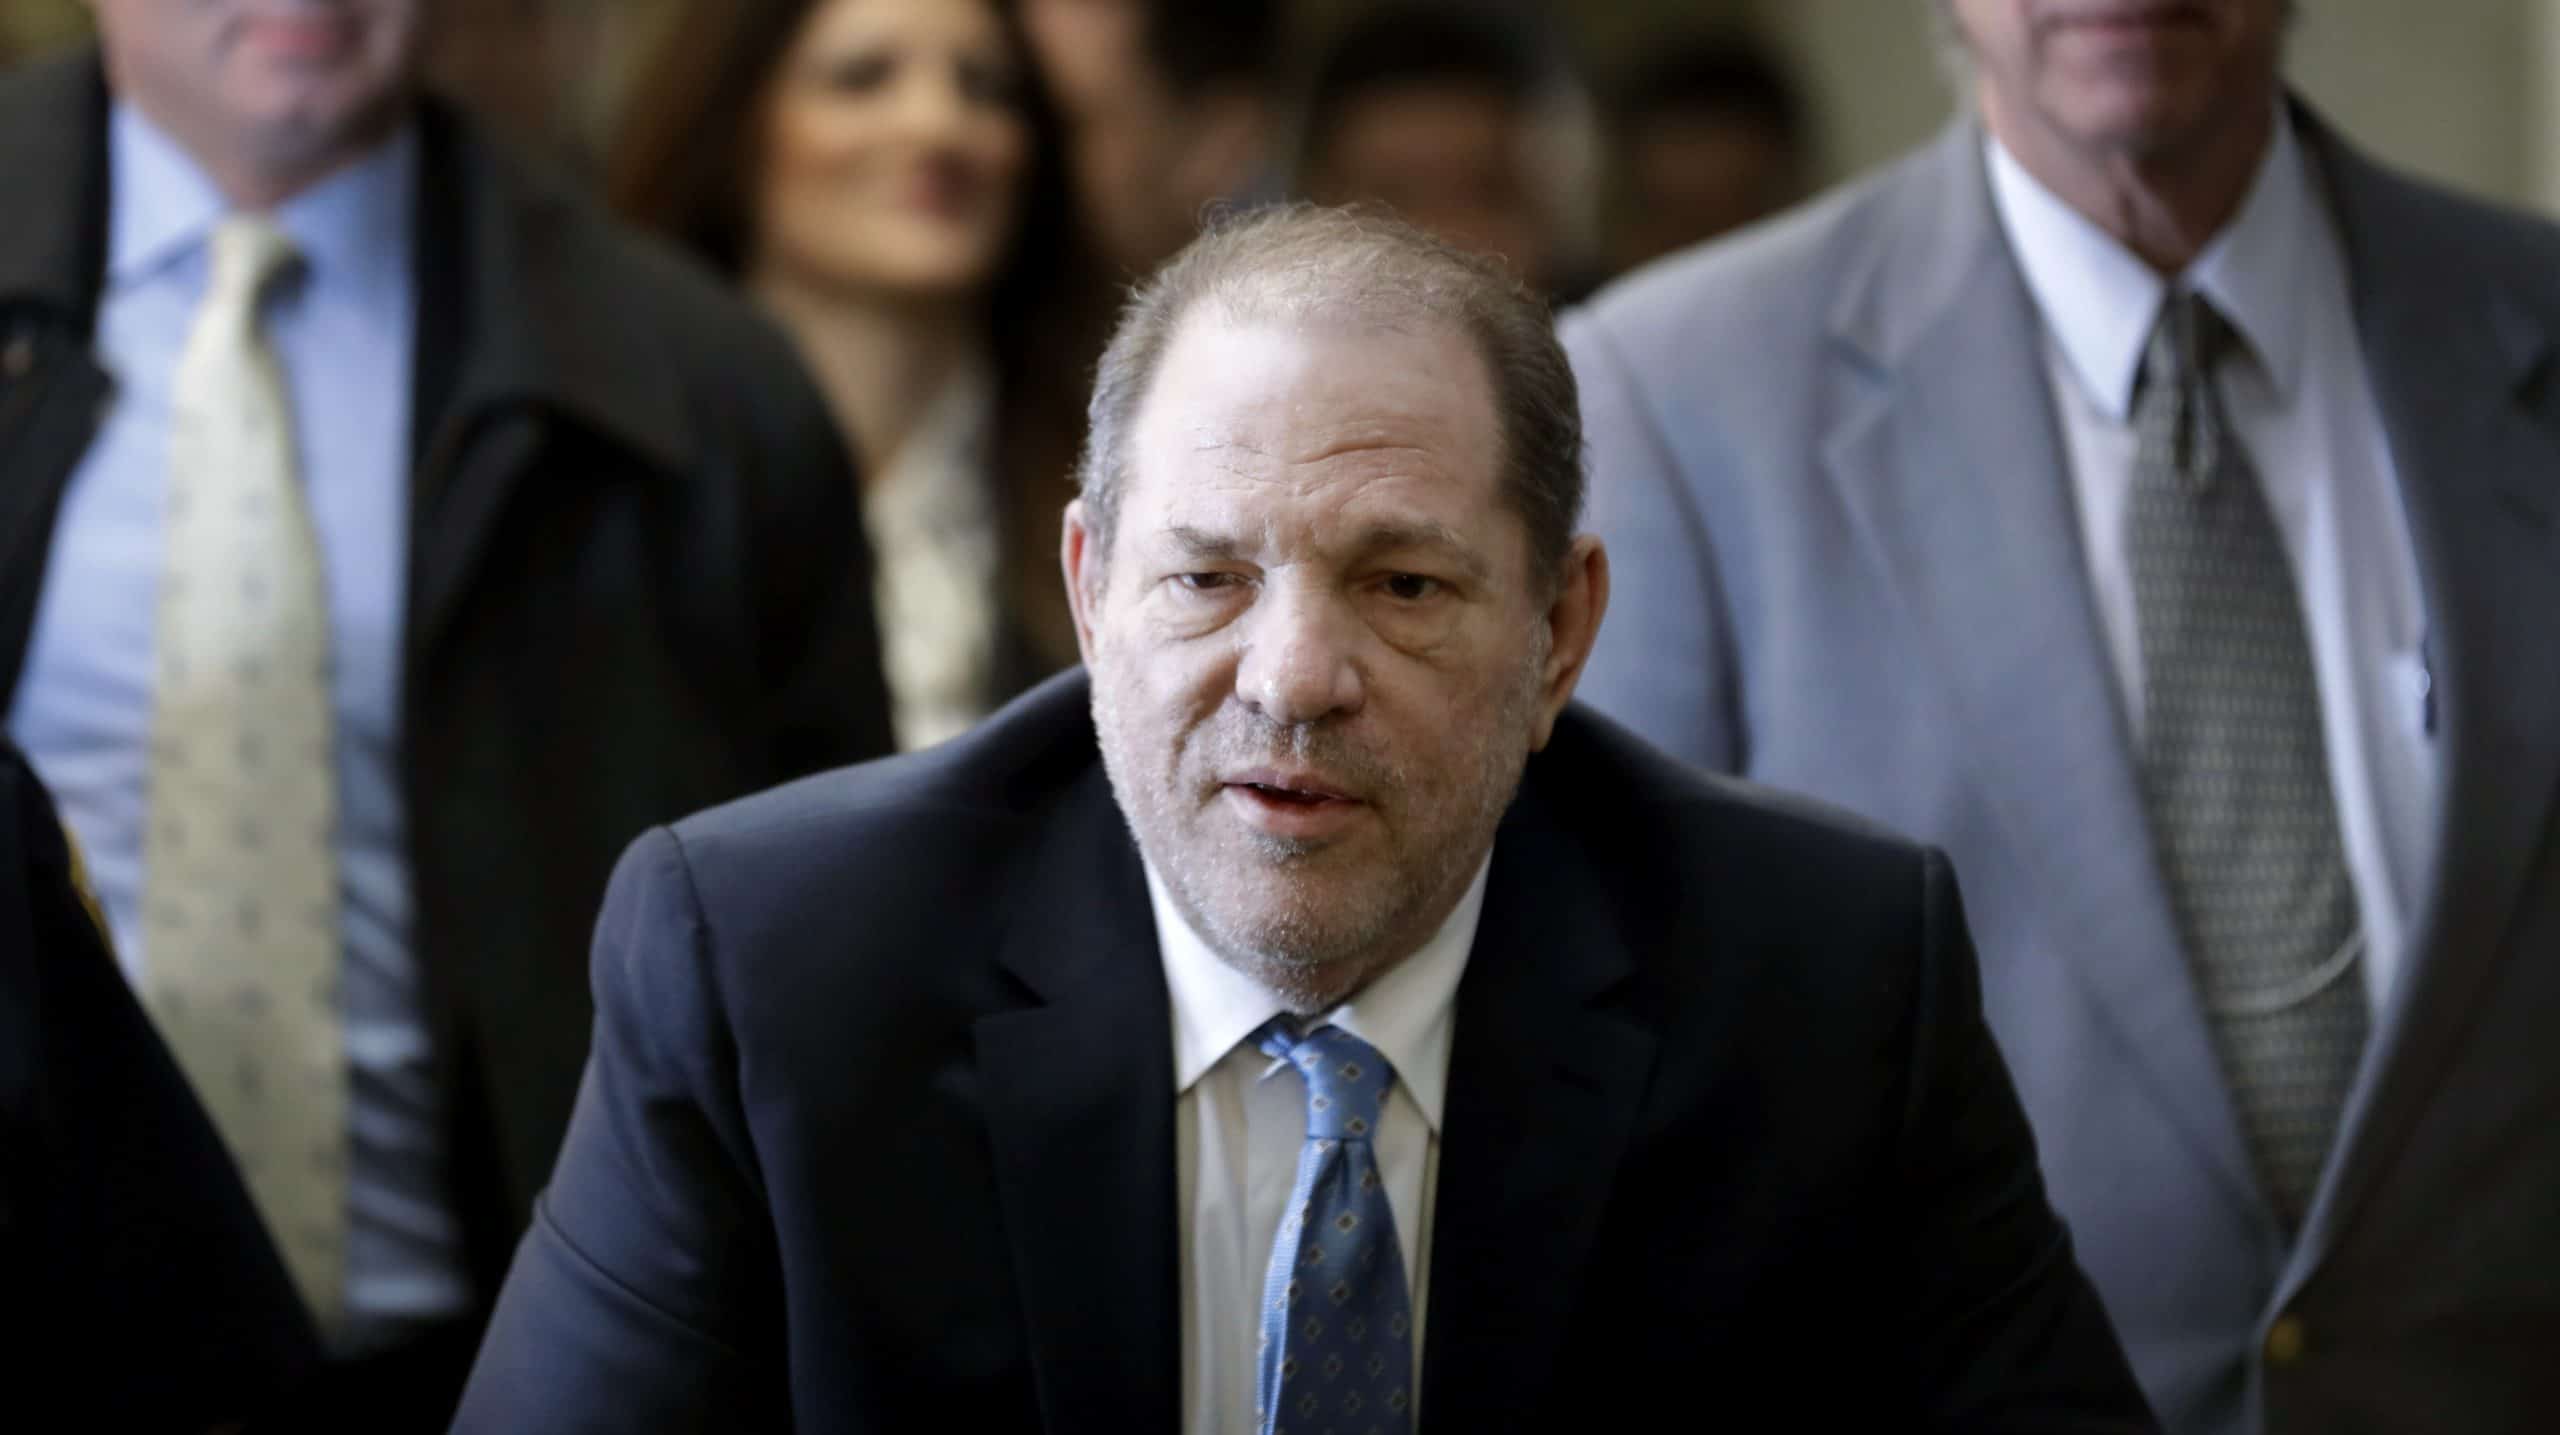 Harvey Weinstein found guilty of rape and criminal sexual act